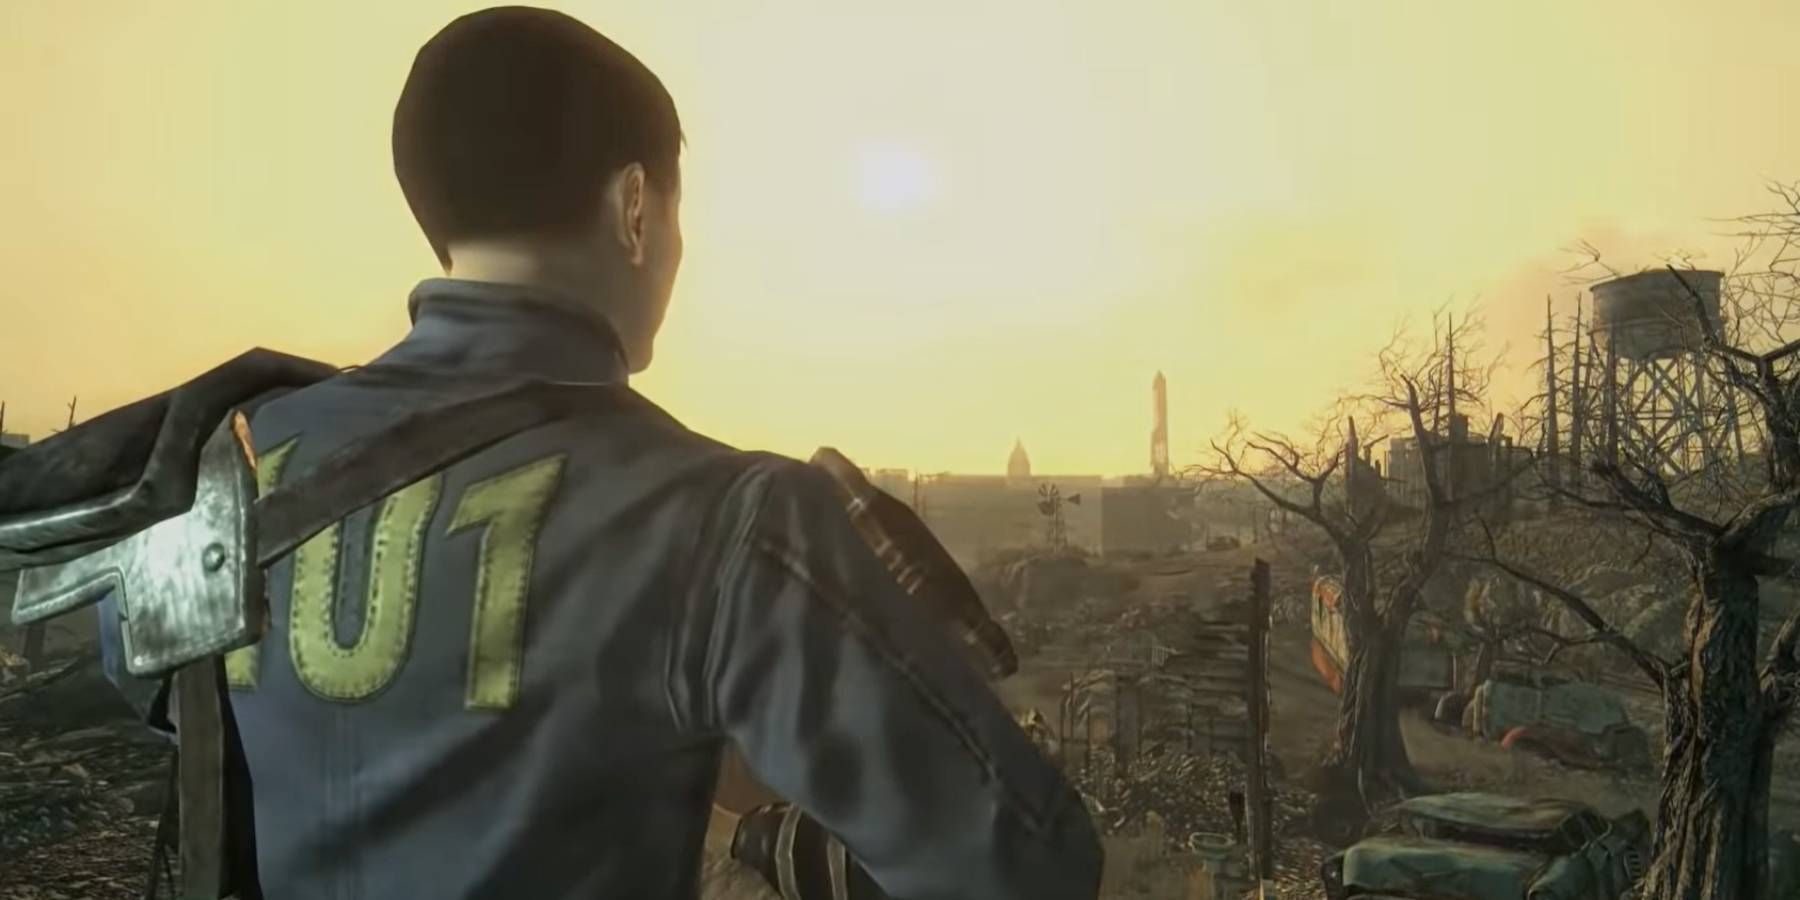 The Lone Wanderer from a Fallout 3 trailer